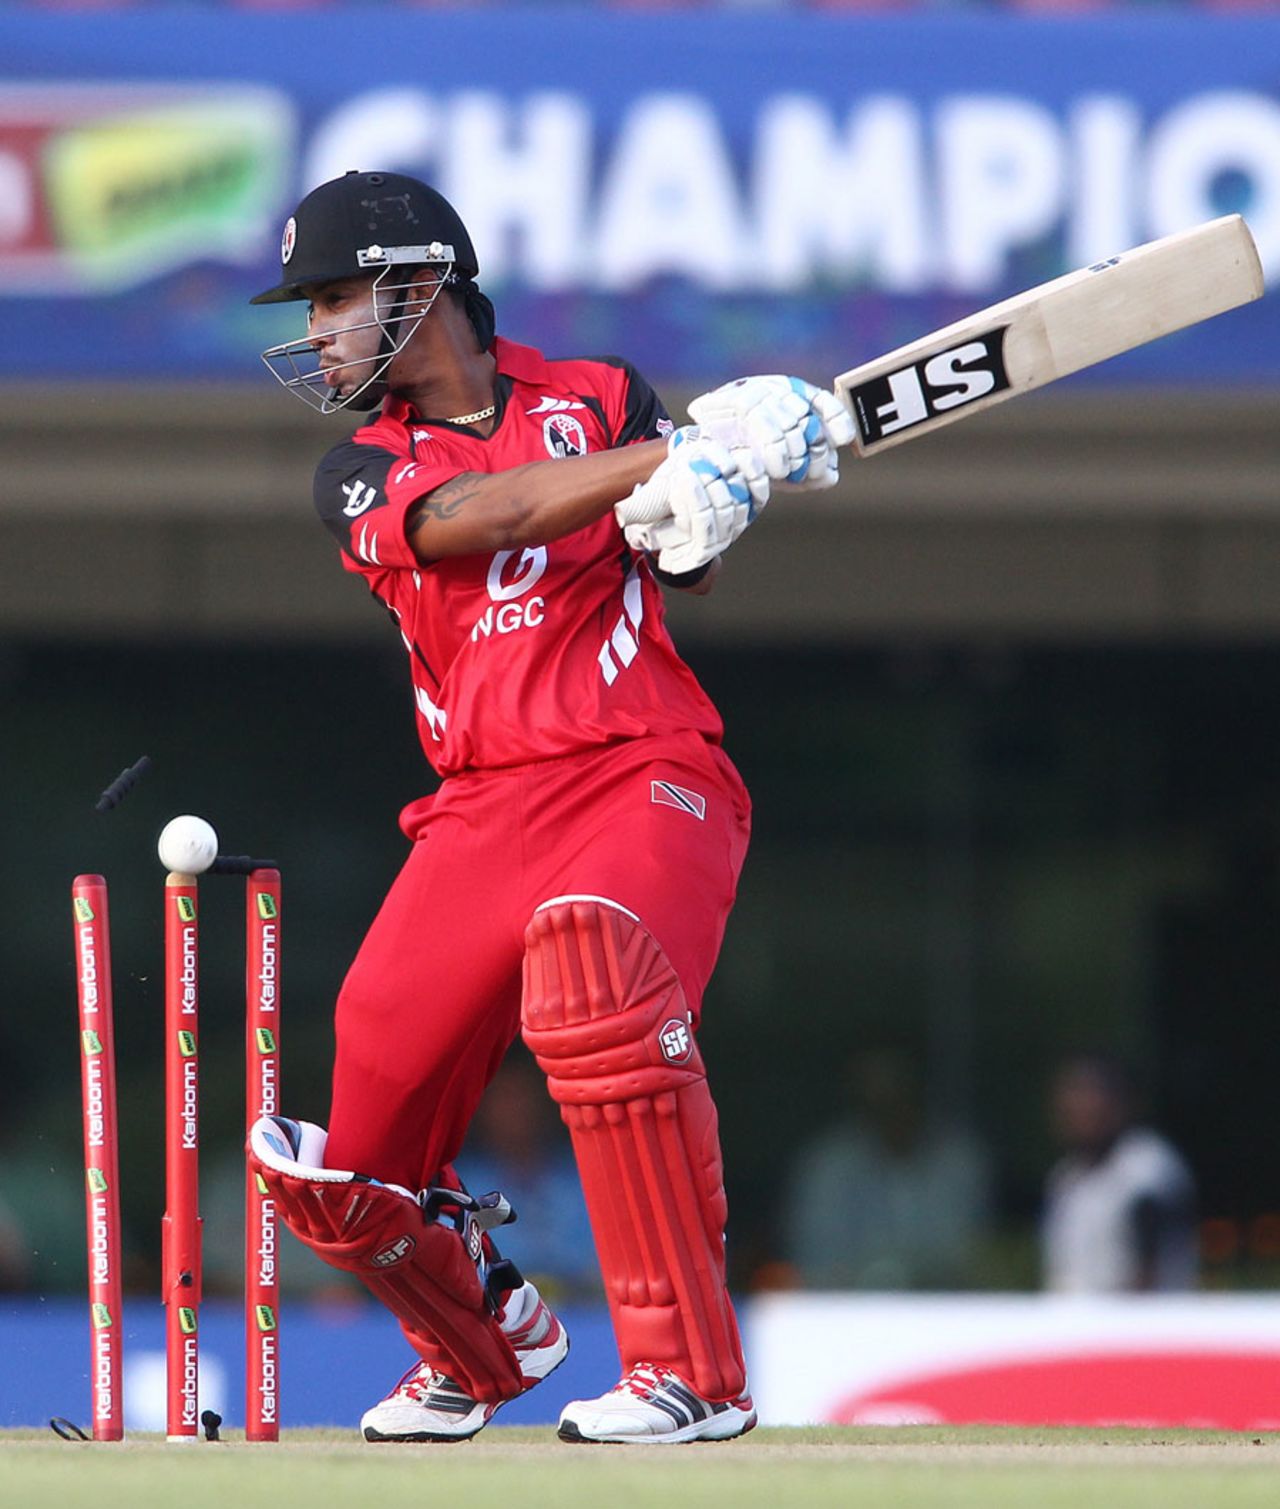 Lendl Simmons was bowled by Alister McDermott for 14, Brisbane Heat v Trinidad & Tobago, Champions League 2013, Group B, Ranchi, September 22, 2013